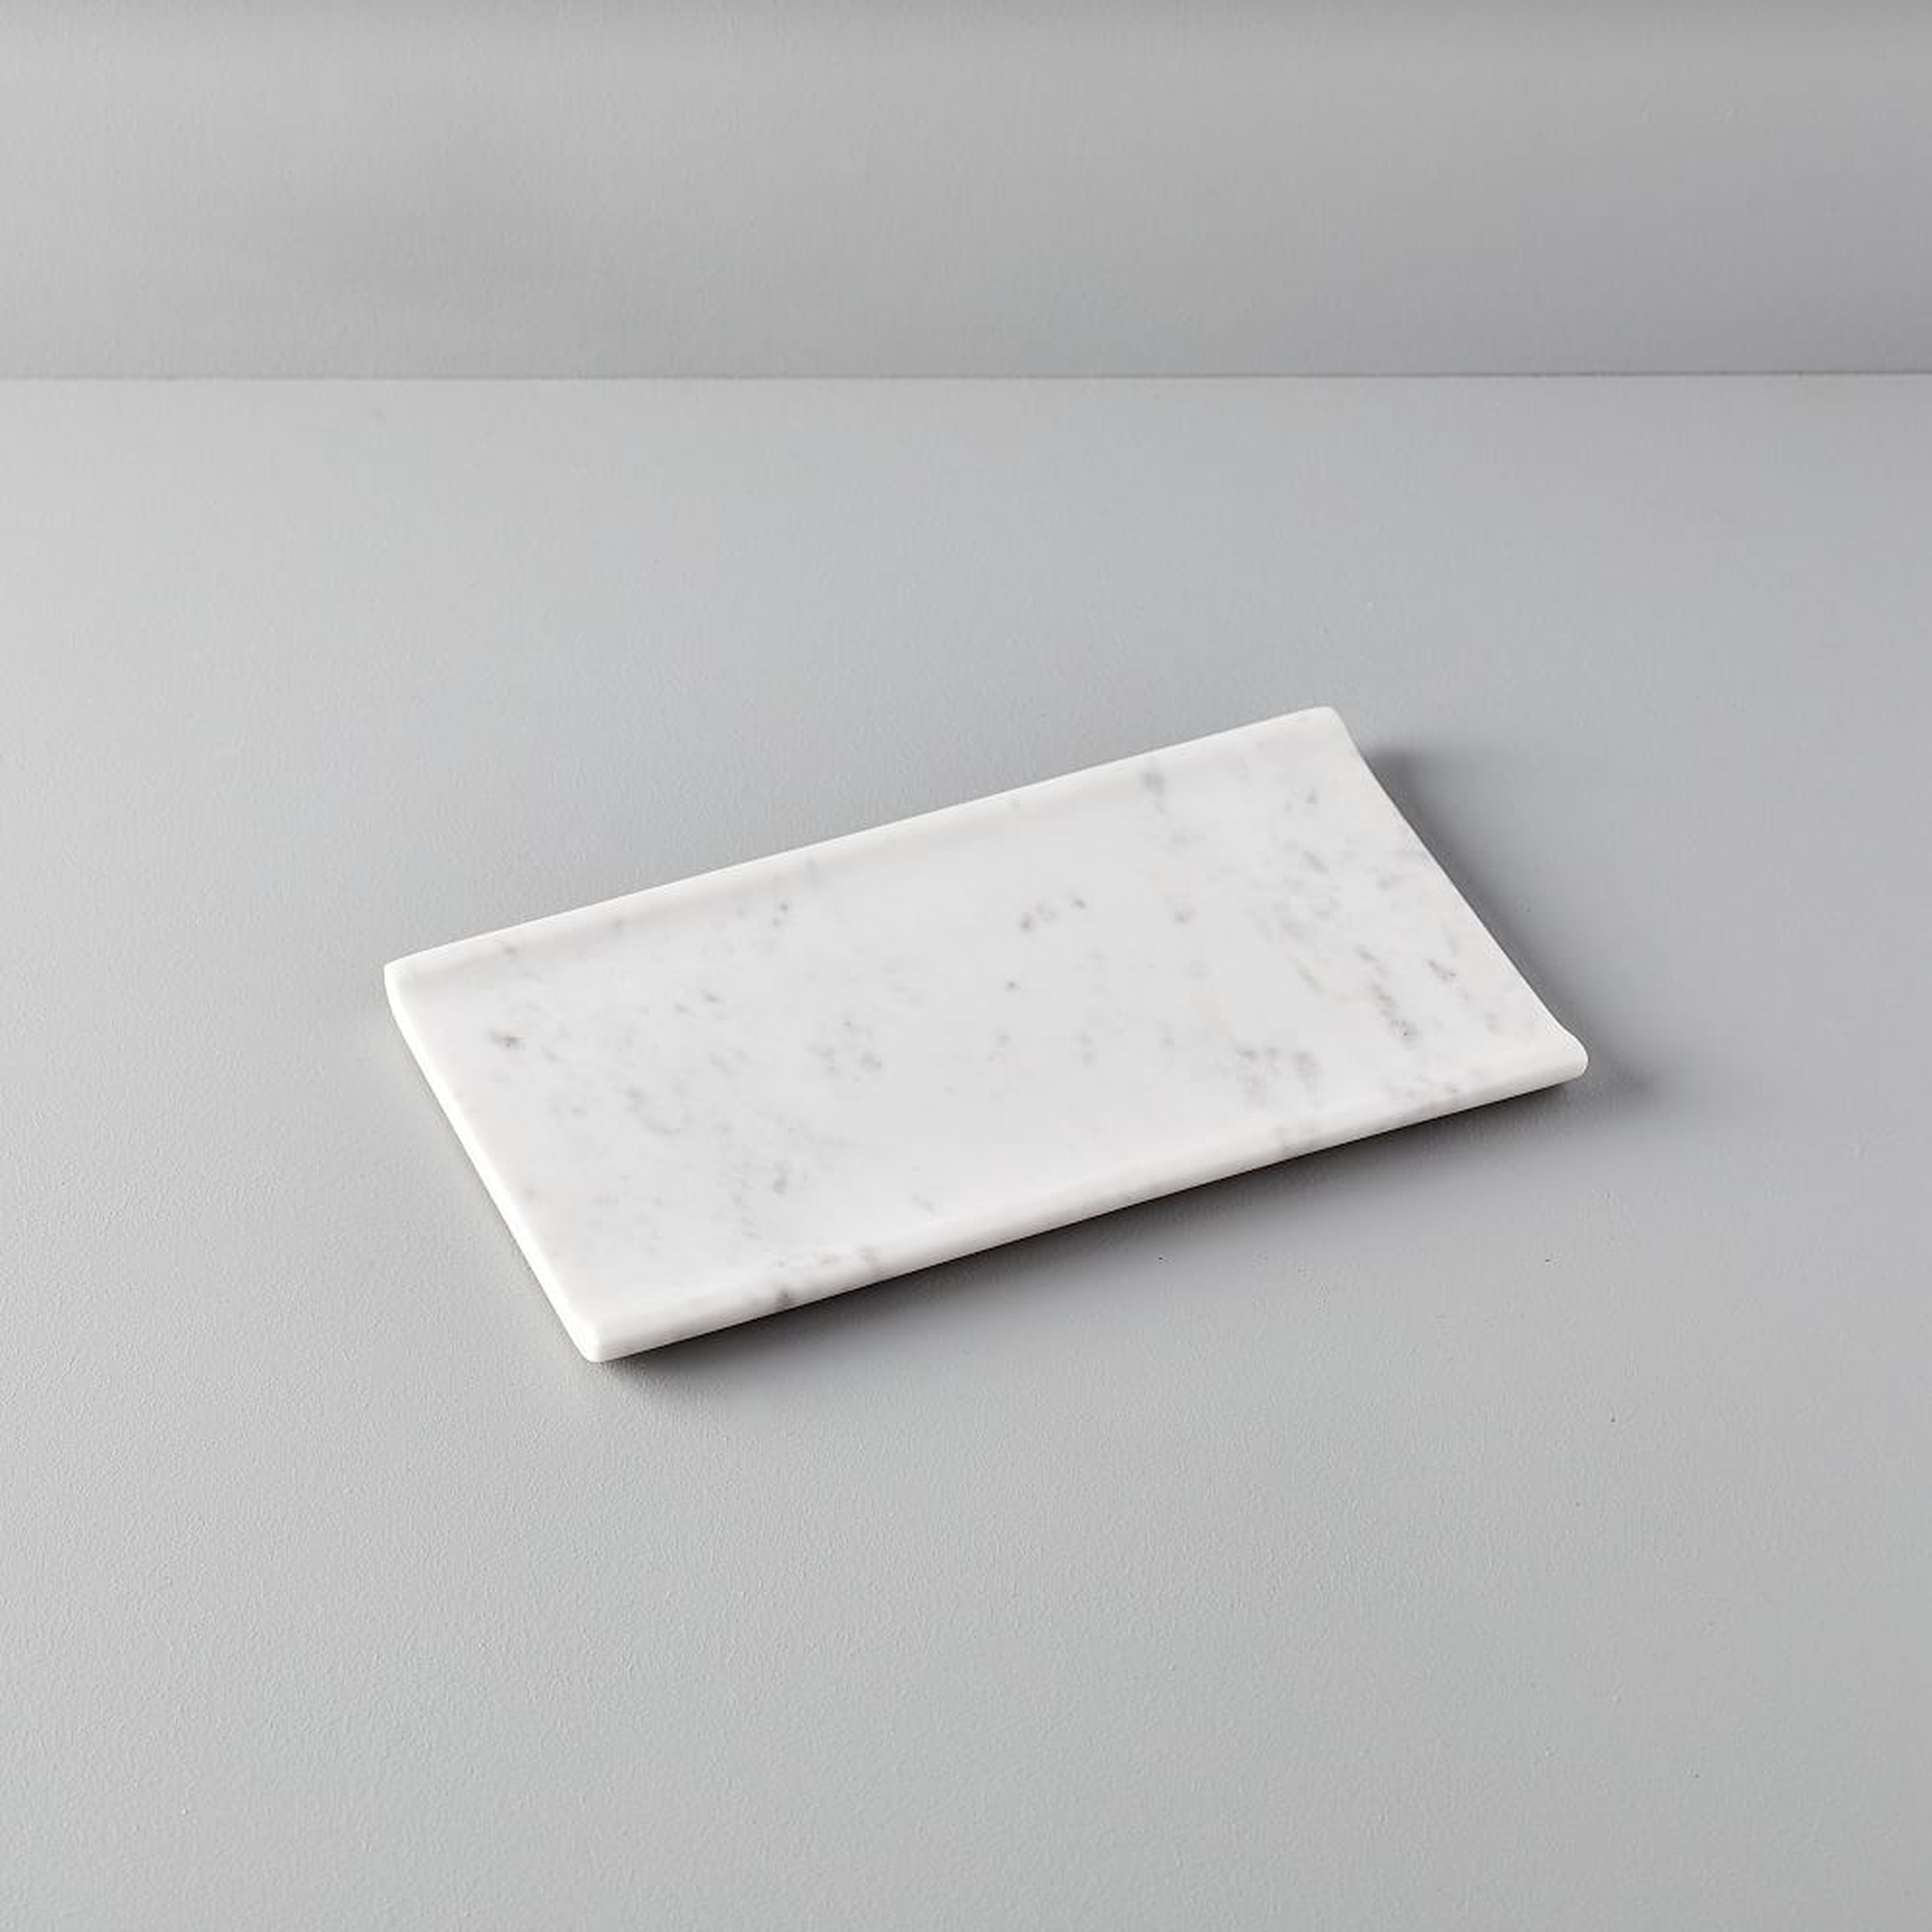 Foundations Tray, Small - West Elm